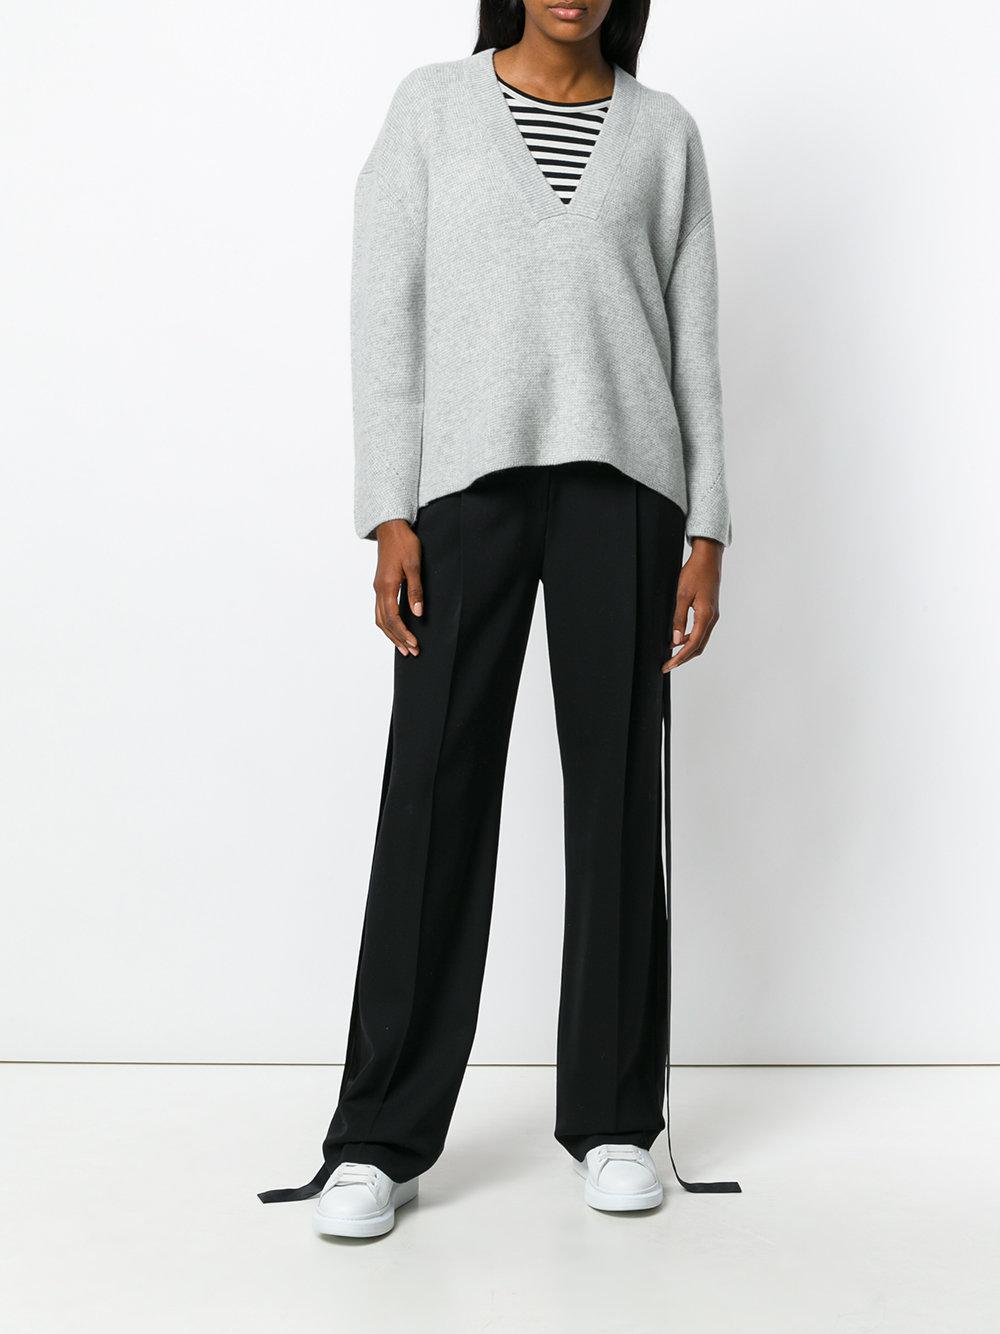 Le Kasha Cashmere Moscow Sweater in Grey (Gray) - Save 32% - Lyst